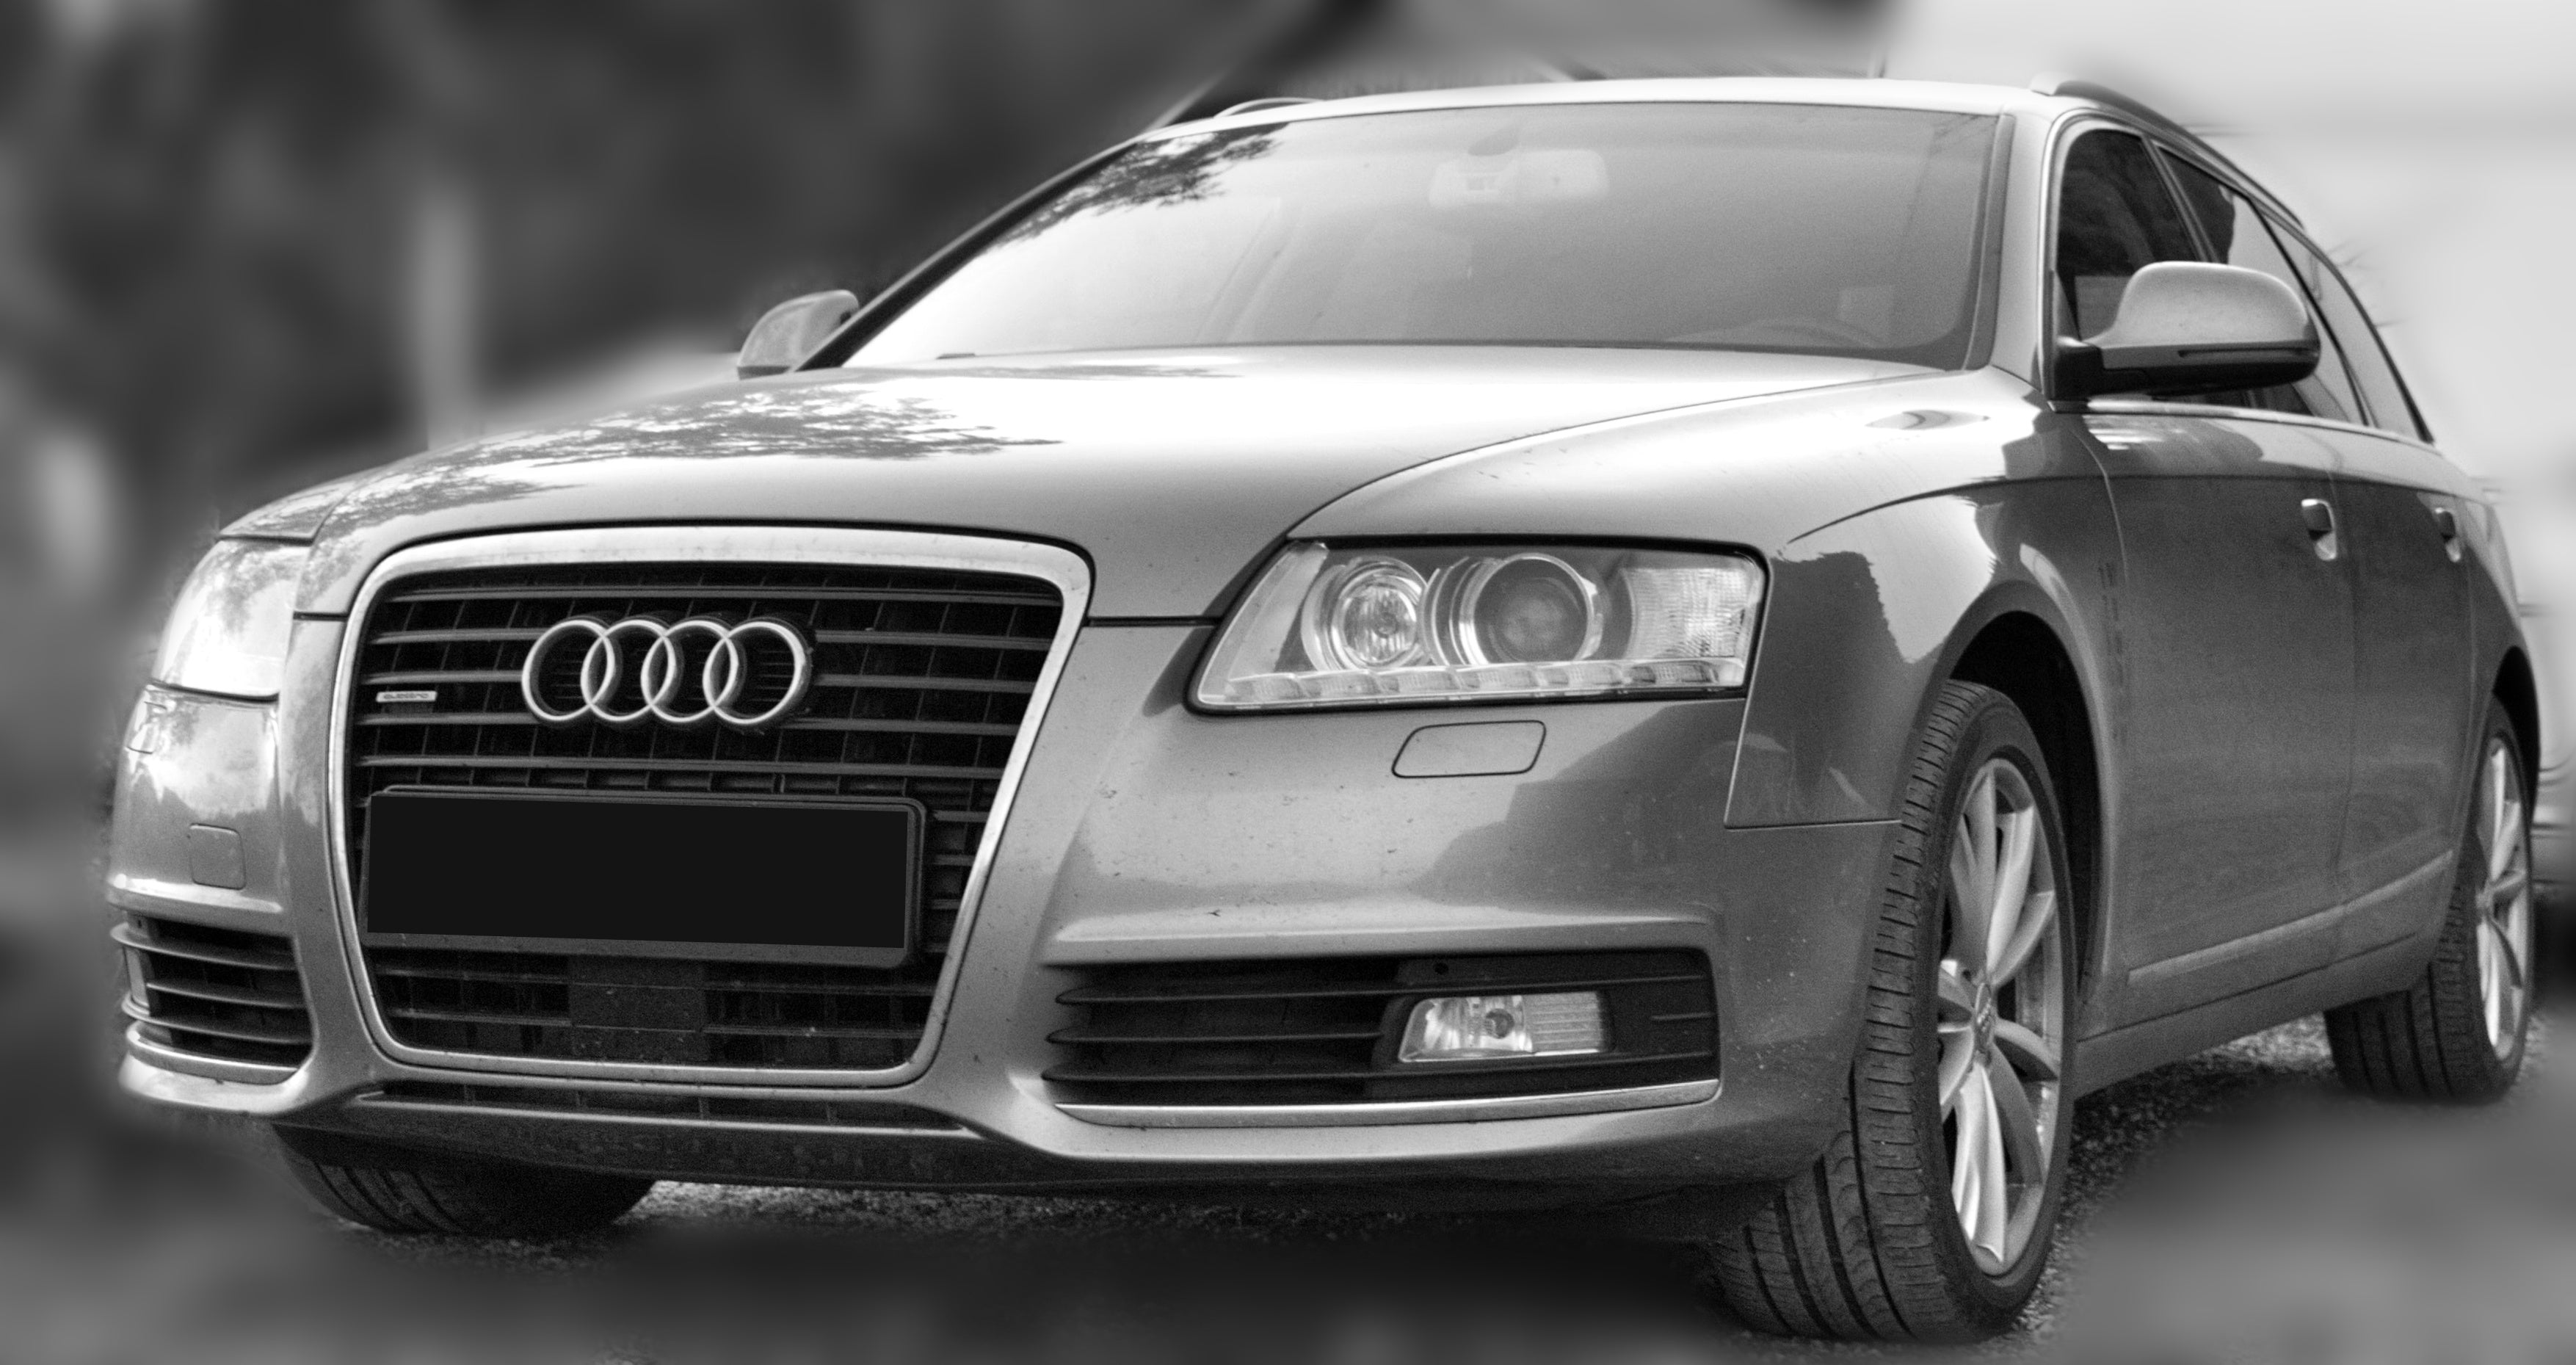 Audi A6/S6/RS6/allroad (4F) - Ross-Tech Wiki